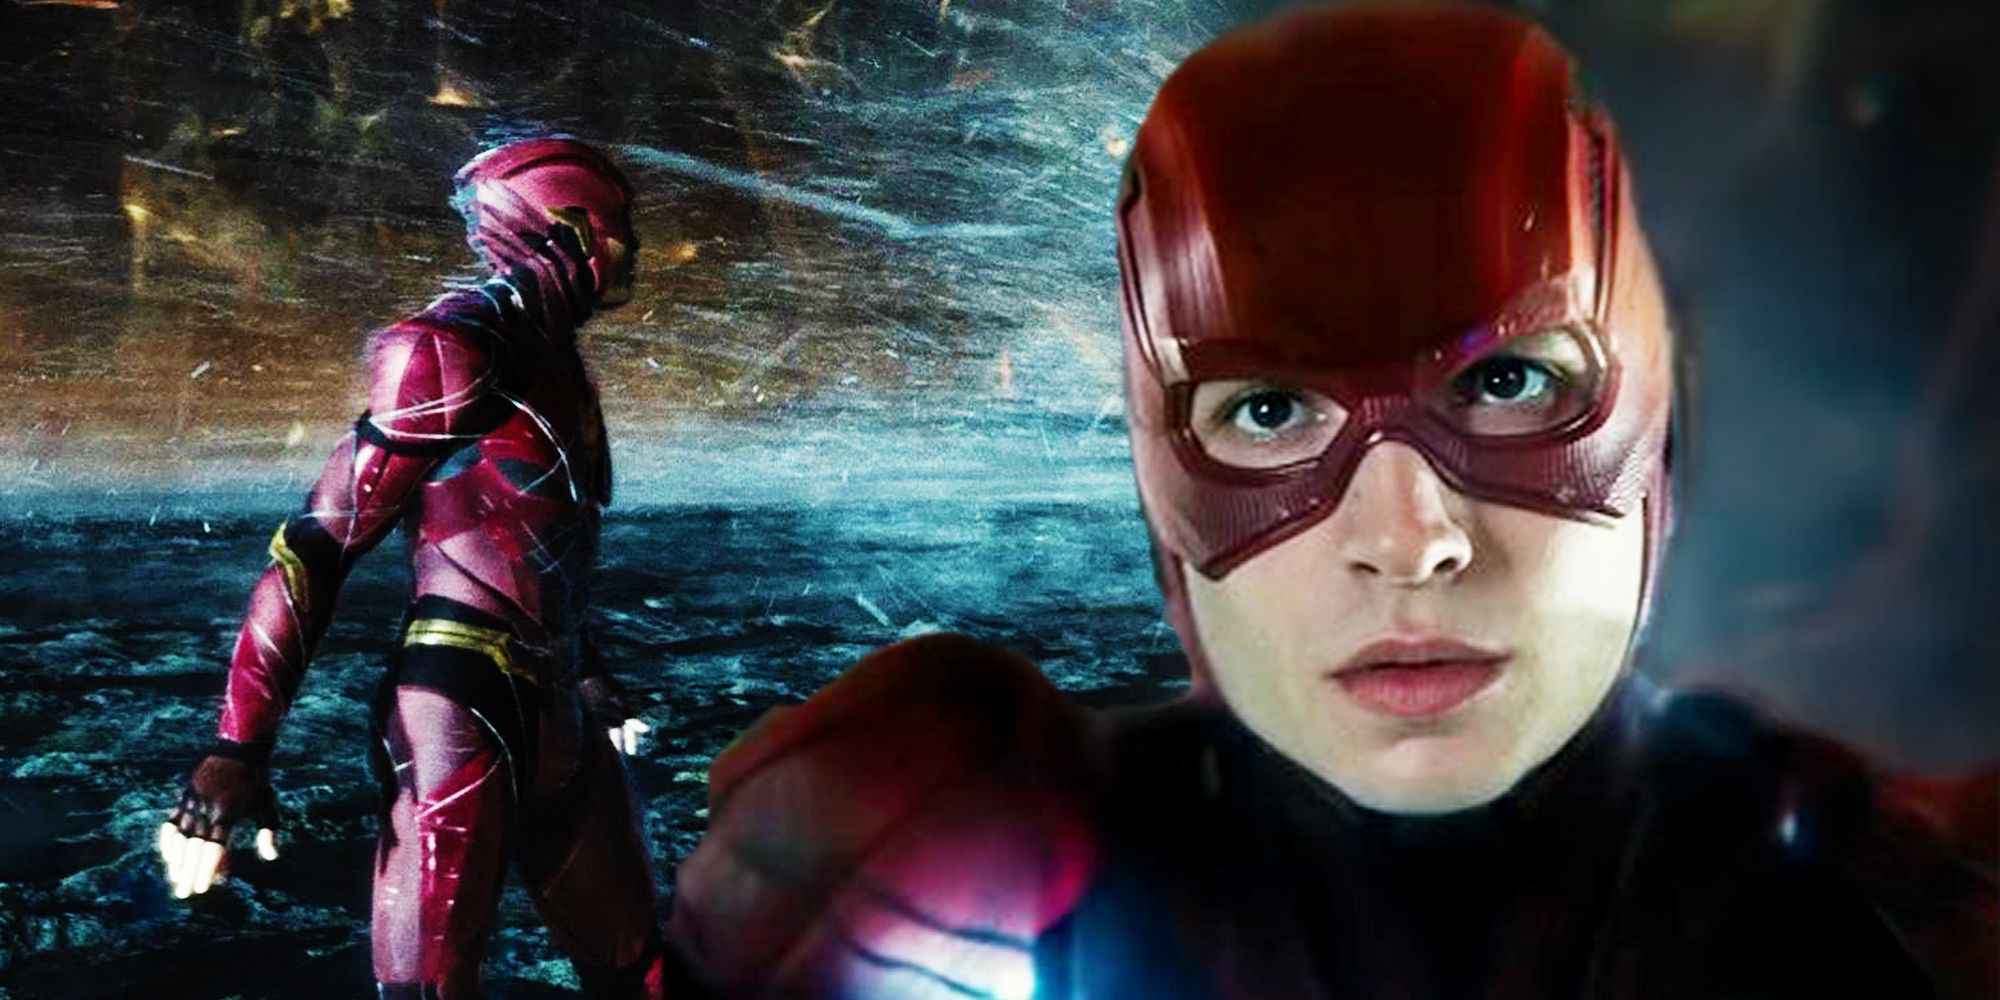 Ezra Miller as The Flash in the Justice League Snyder Cut